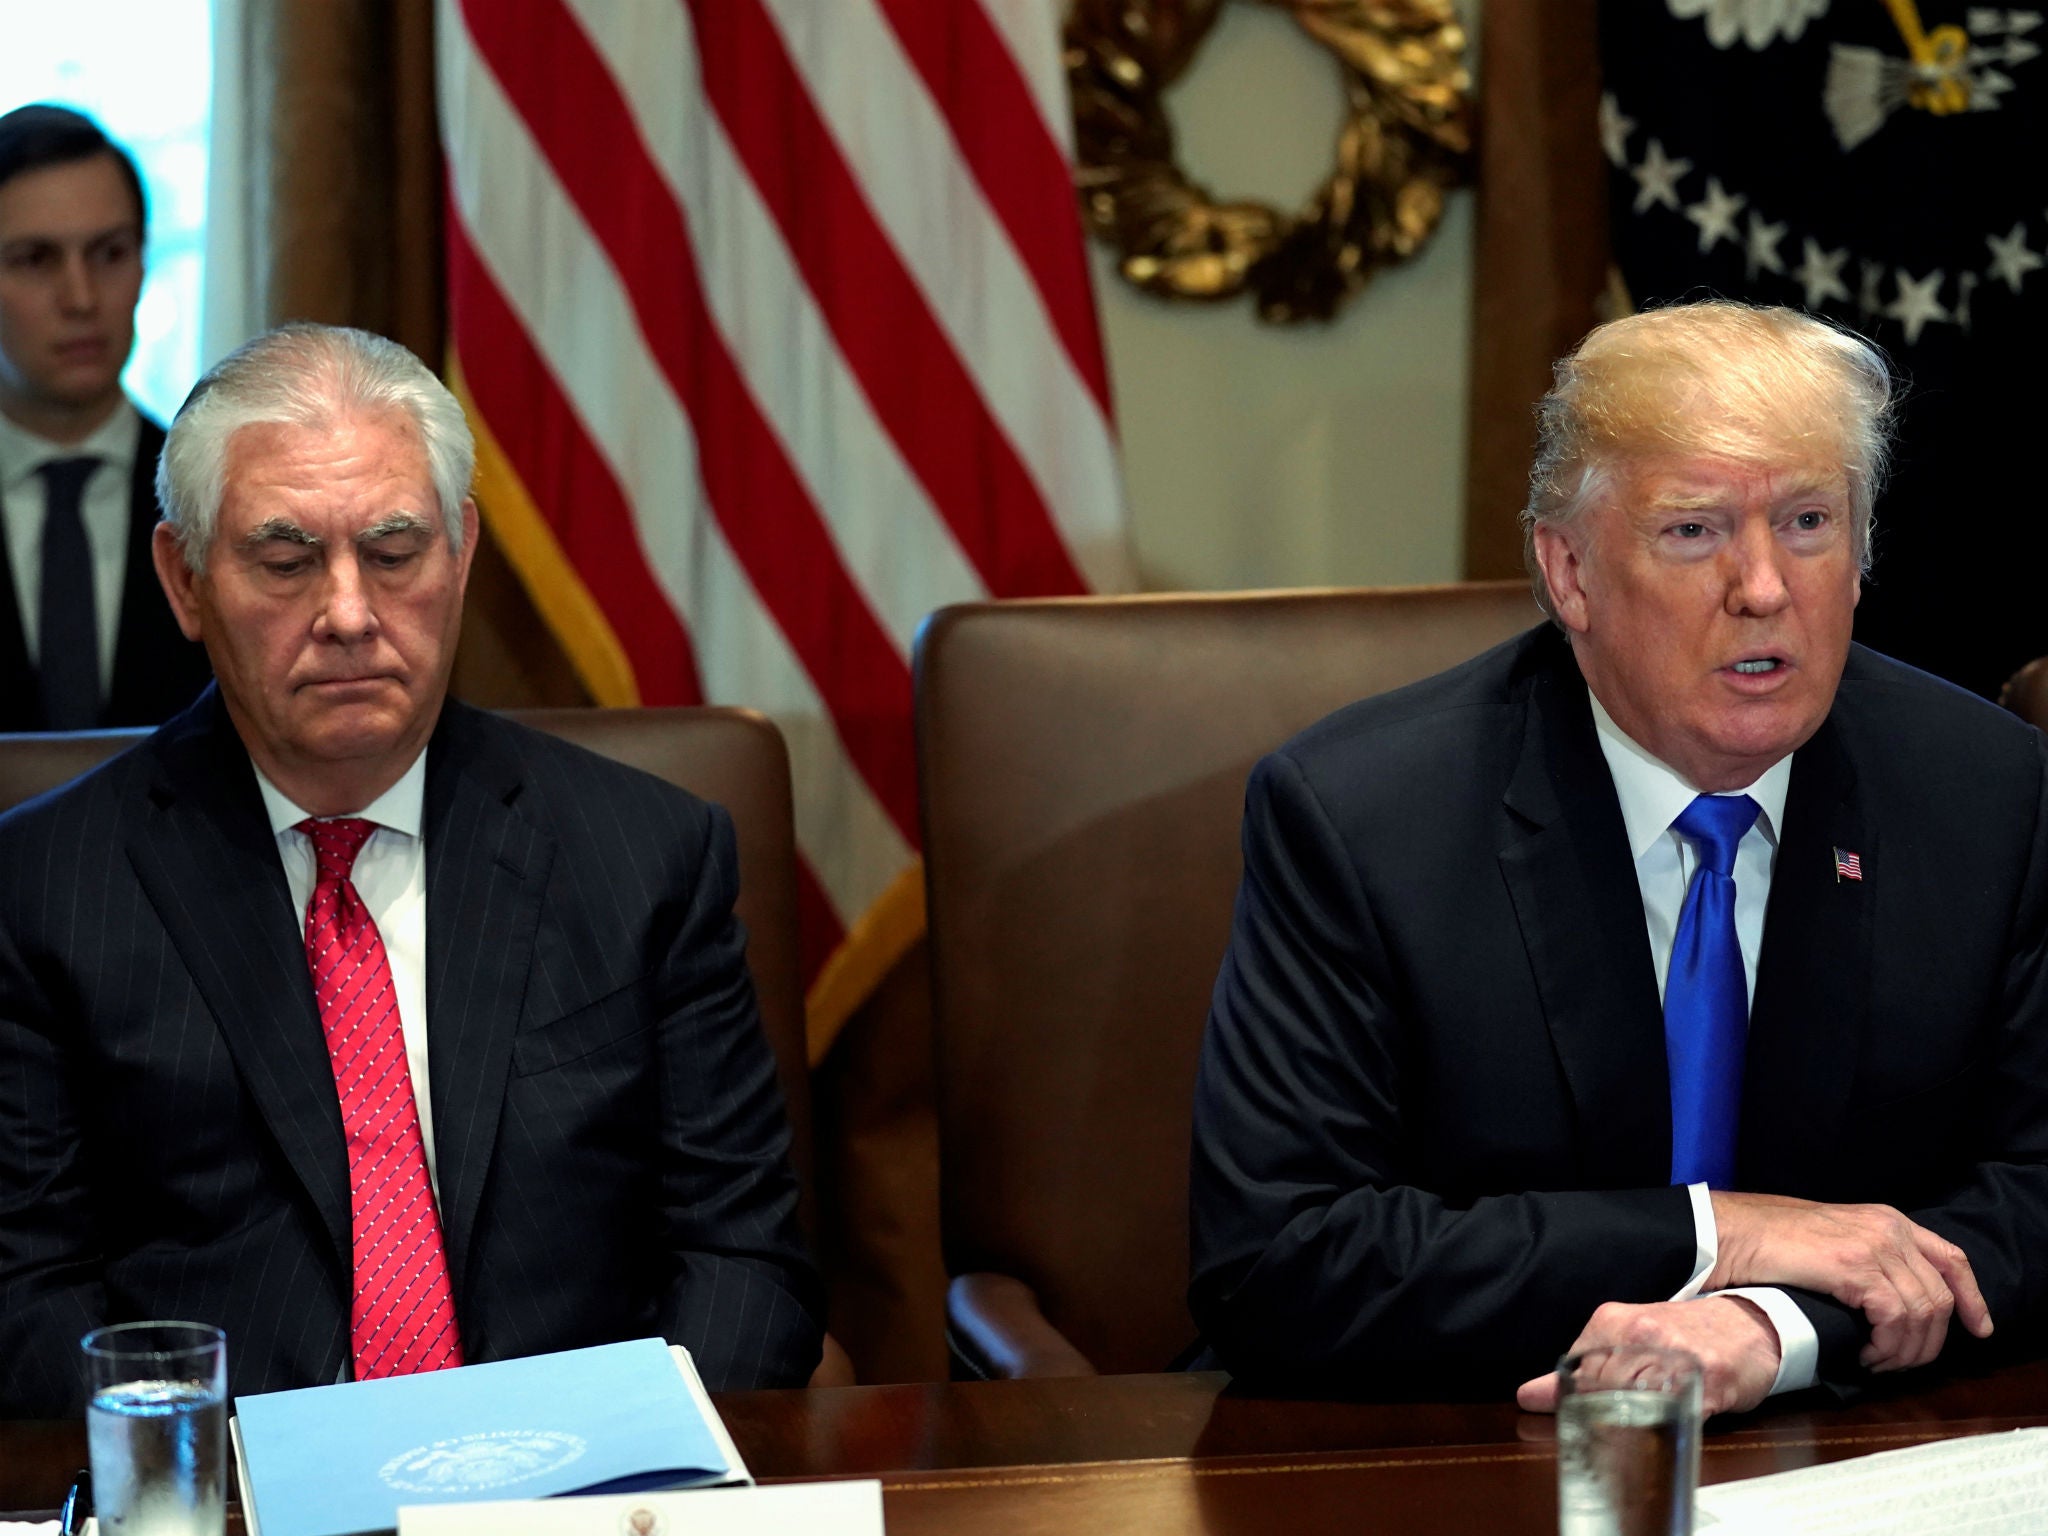 Mr Tillerson pictured seated beside Mr Trump at the White house